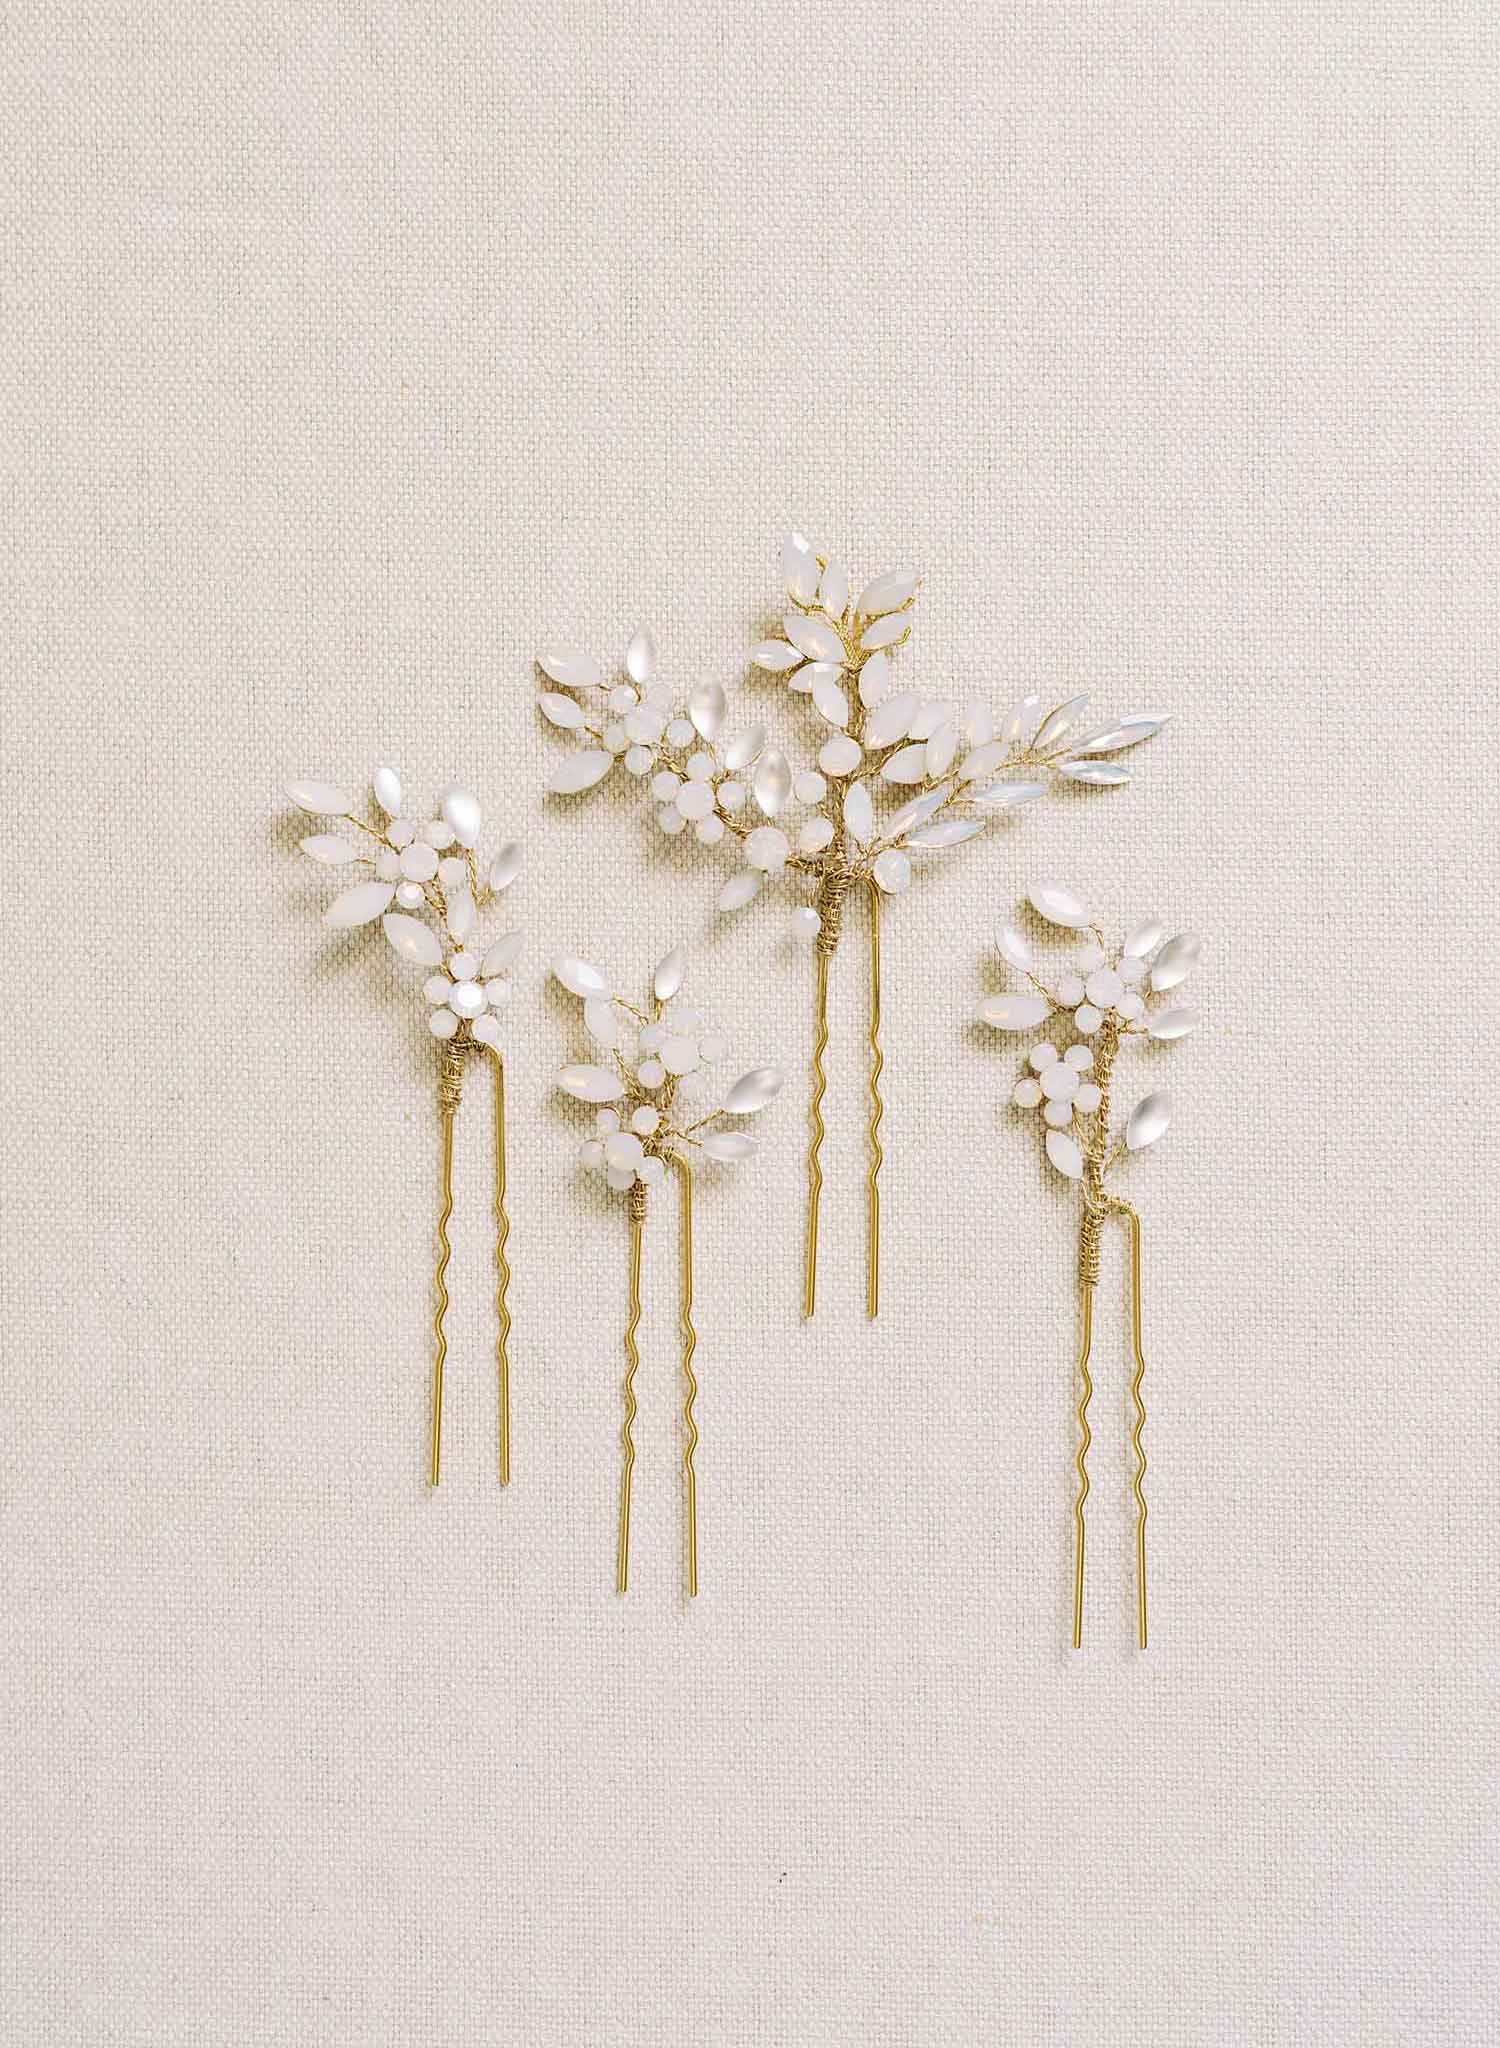 Crystal ferns hair pin set of 4 - Style #2116